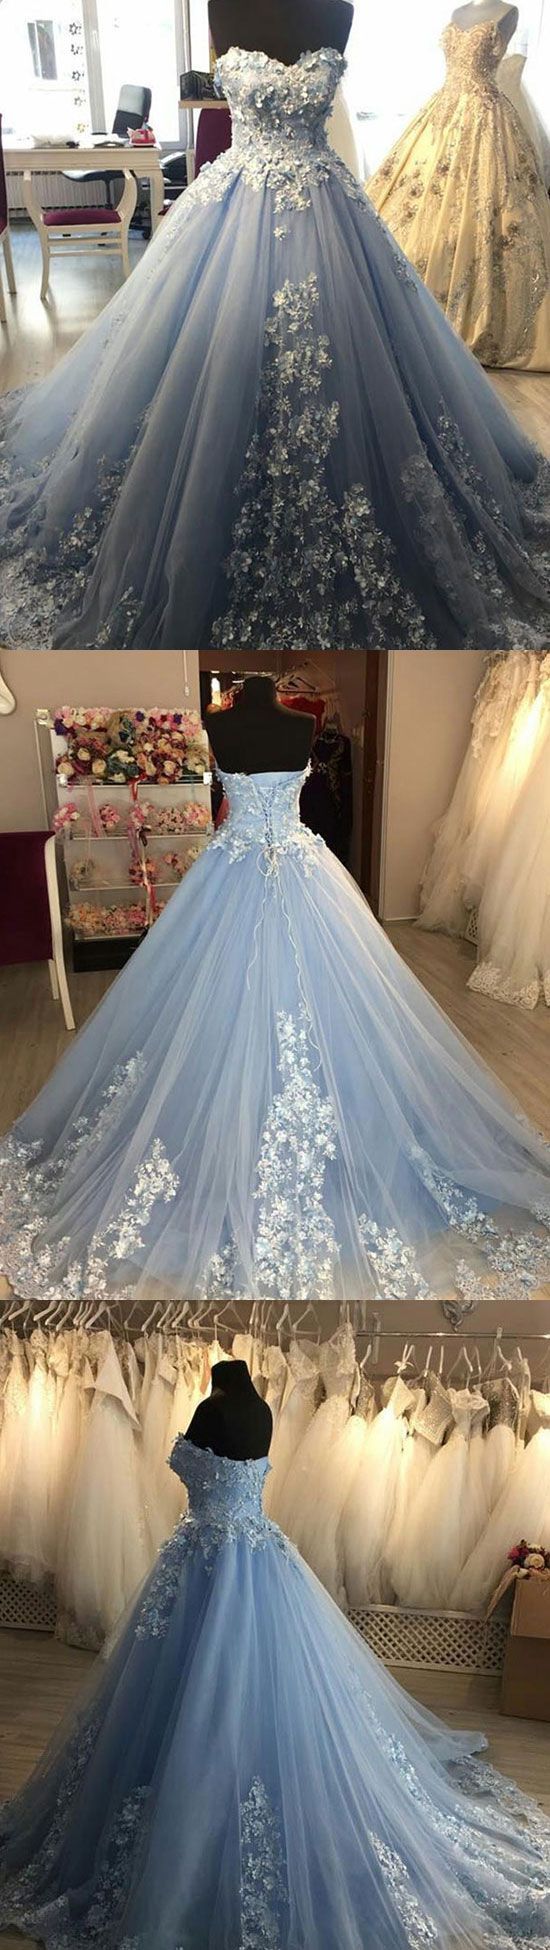 Blue Sweetheart Neck Tulle Lace Applique Long Prom Dress, Blue Evening ...